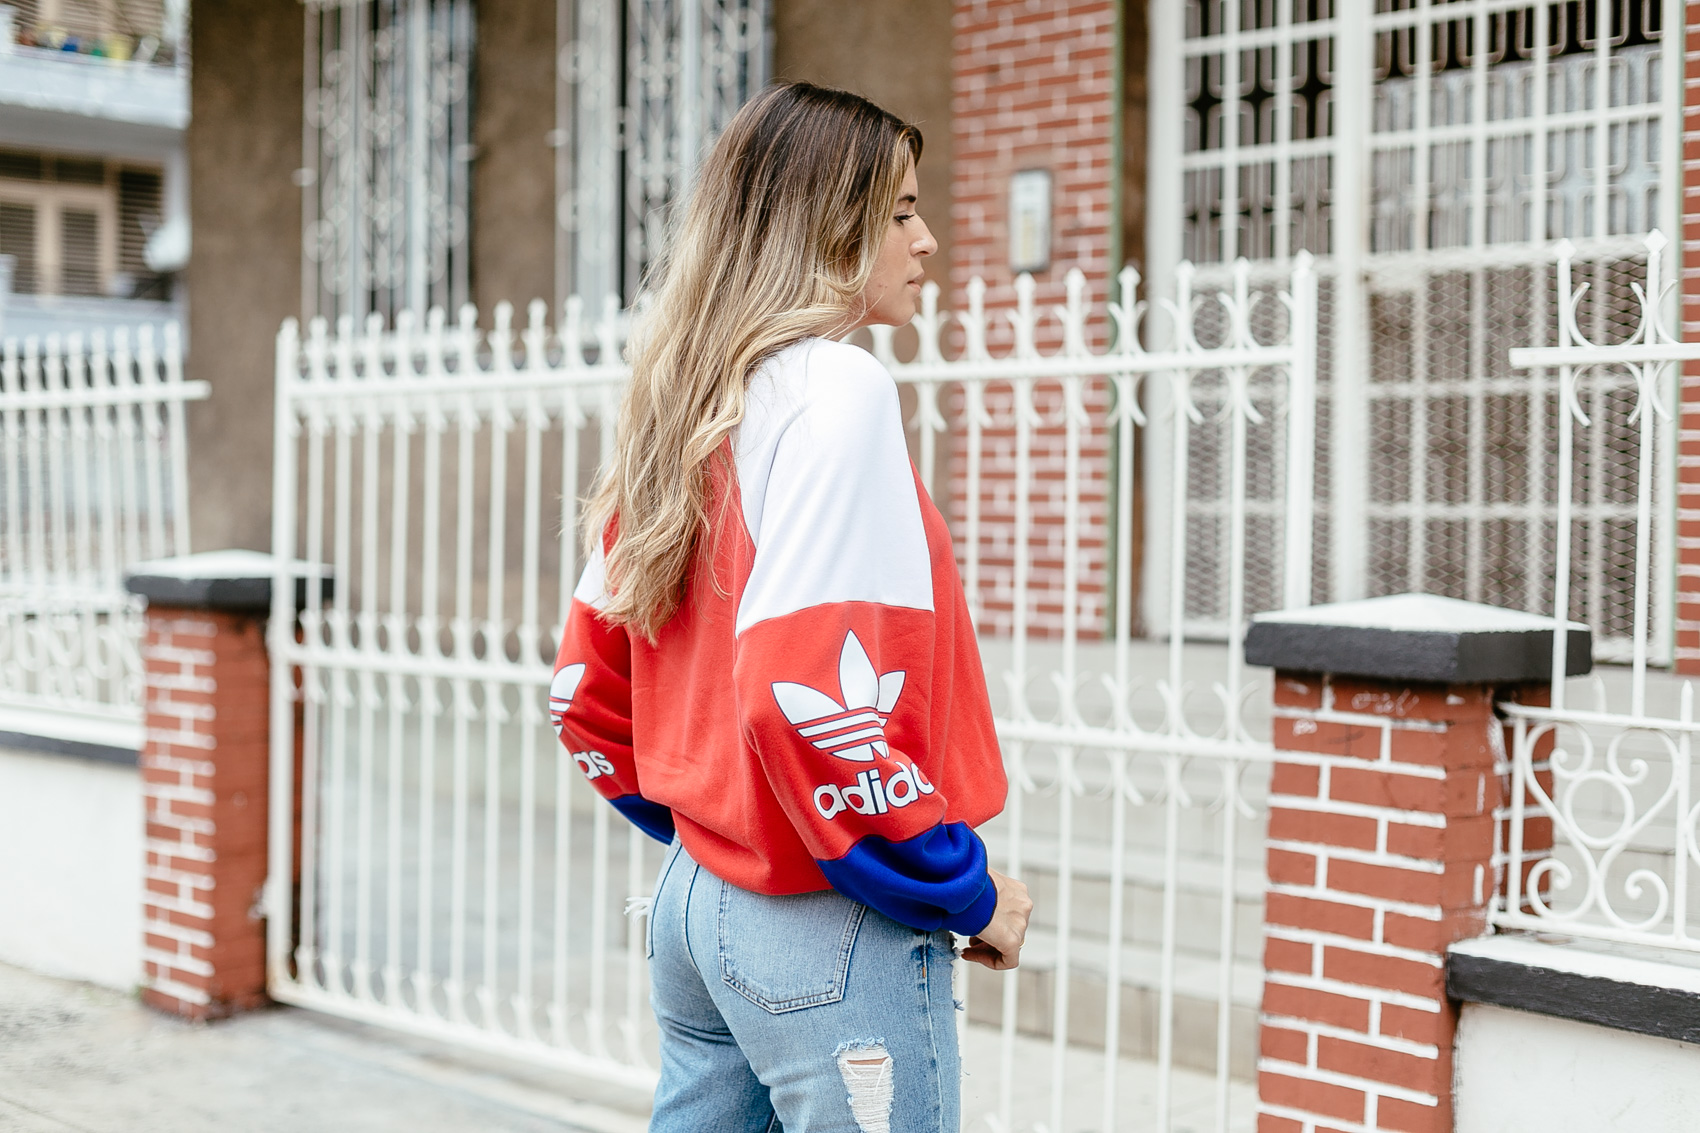 Maristella shows how to wear a sweatshirt like a fashion blogger with ripped high rise skinny jeans